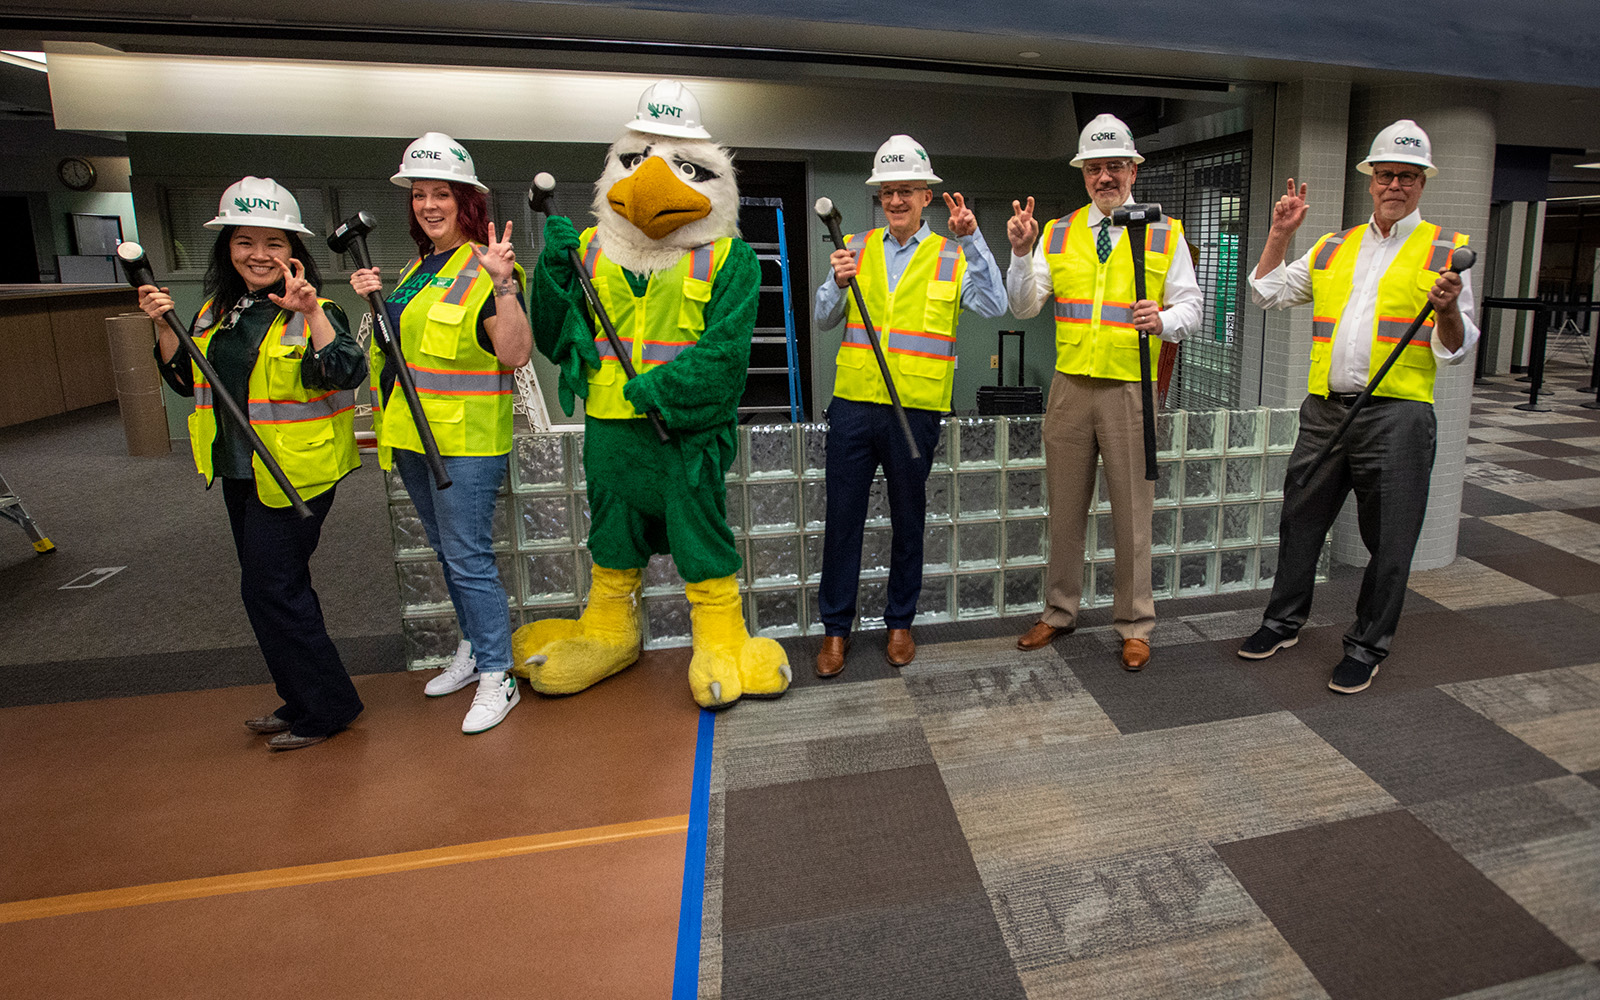 President Smatresk stands with Scrappy and others at the demolition site with sledgehammers and making the eagle claw gesture